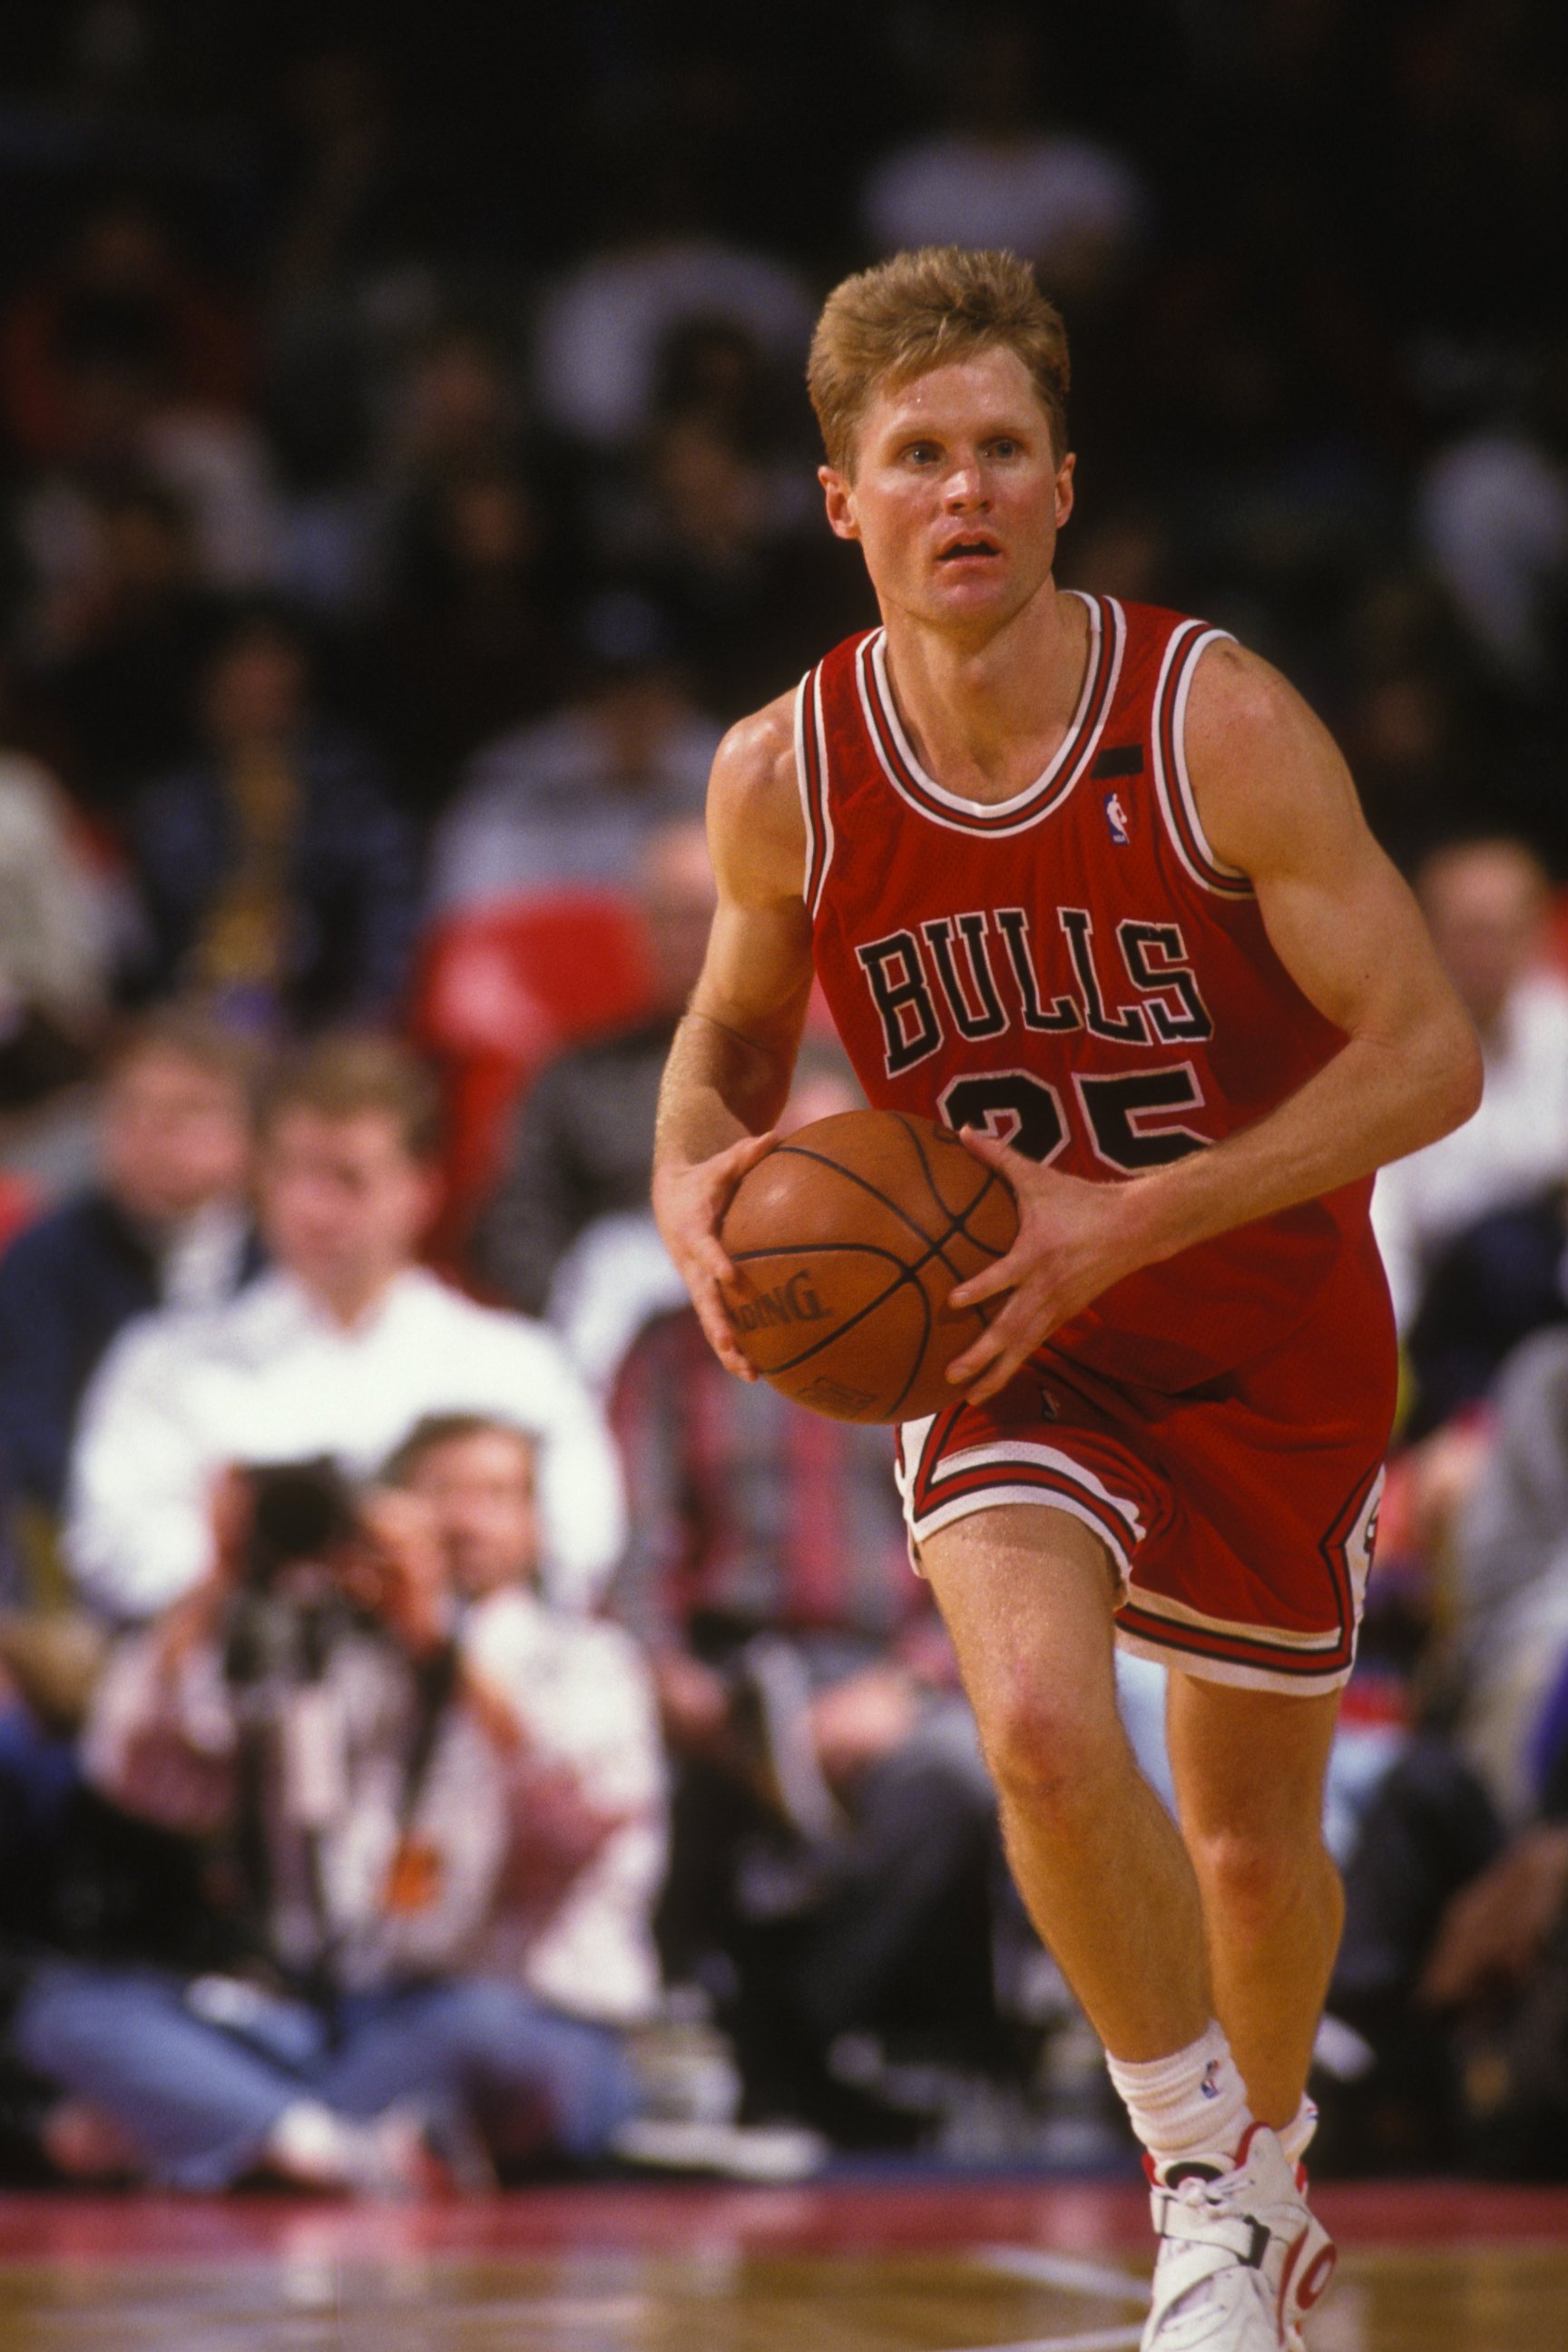 PHOTO: Steve Kerr #25 of the Chicago Bulls dribbles the ball up court during a NBA basketball game against the Washington Bullets at USAir Arena on March 1, 1996 in Landover, Maryland.  